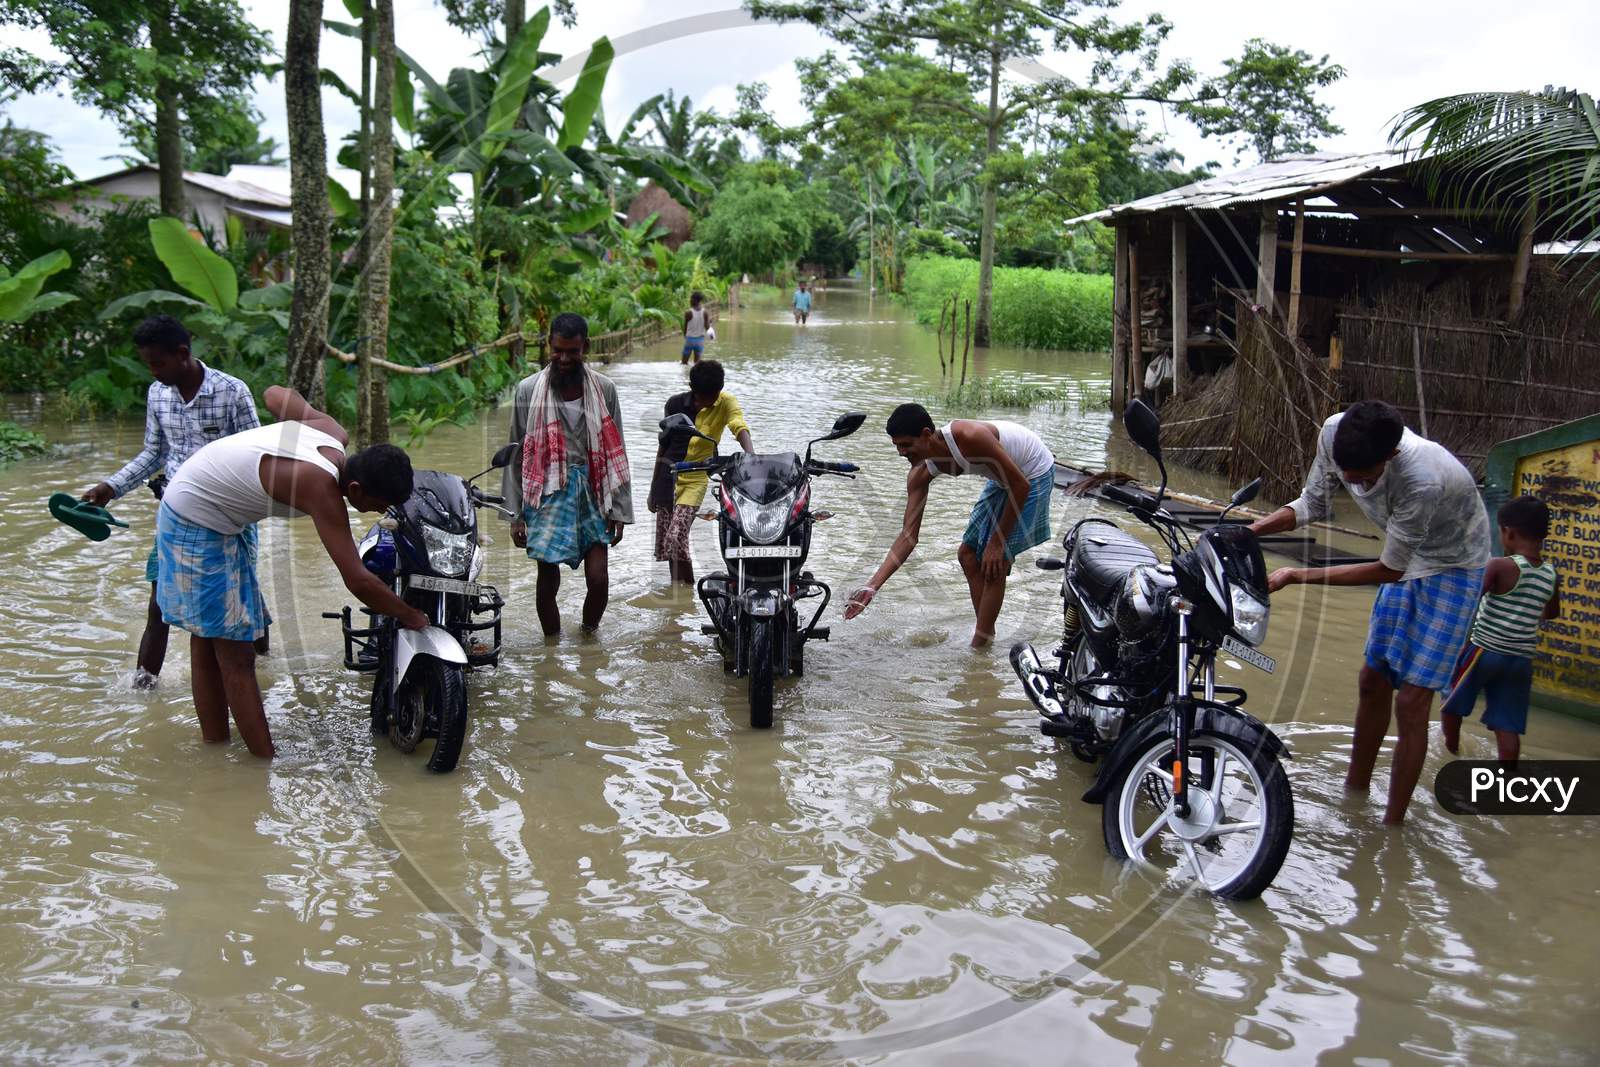 People Clean Their Bike In Floodwaters Following Heavy Rainfall At Bhurbandha Village In Nagaon District Of Assam On June 27,2020.